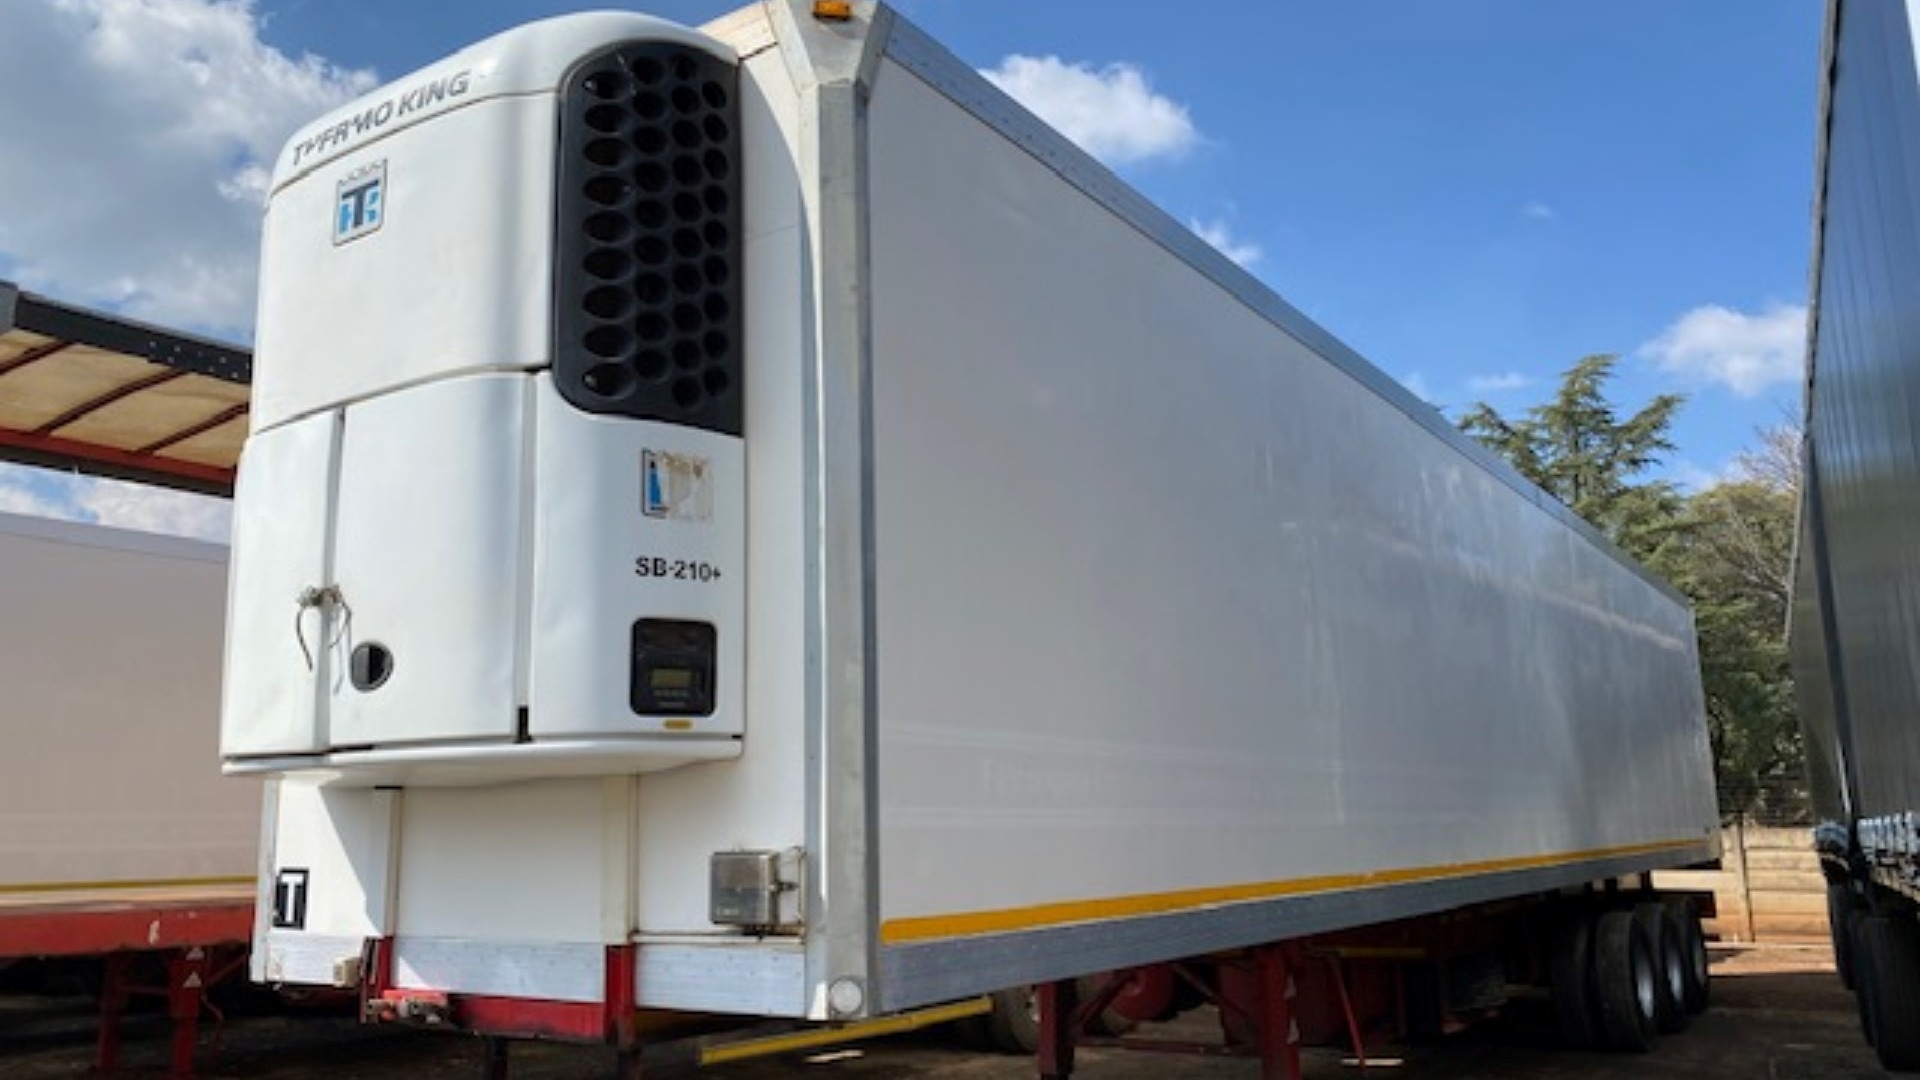 Paramount Trailers Refrigerated trailer 30 Pallet Tri Axle Refrigerator Trailer 2015 for sale by Atlas Truck Centre Pty Ltd | Truck & Trailer Marketplace